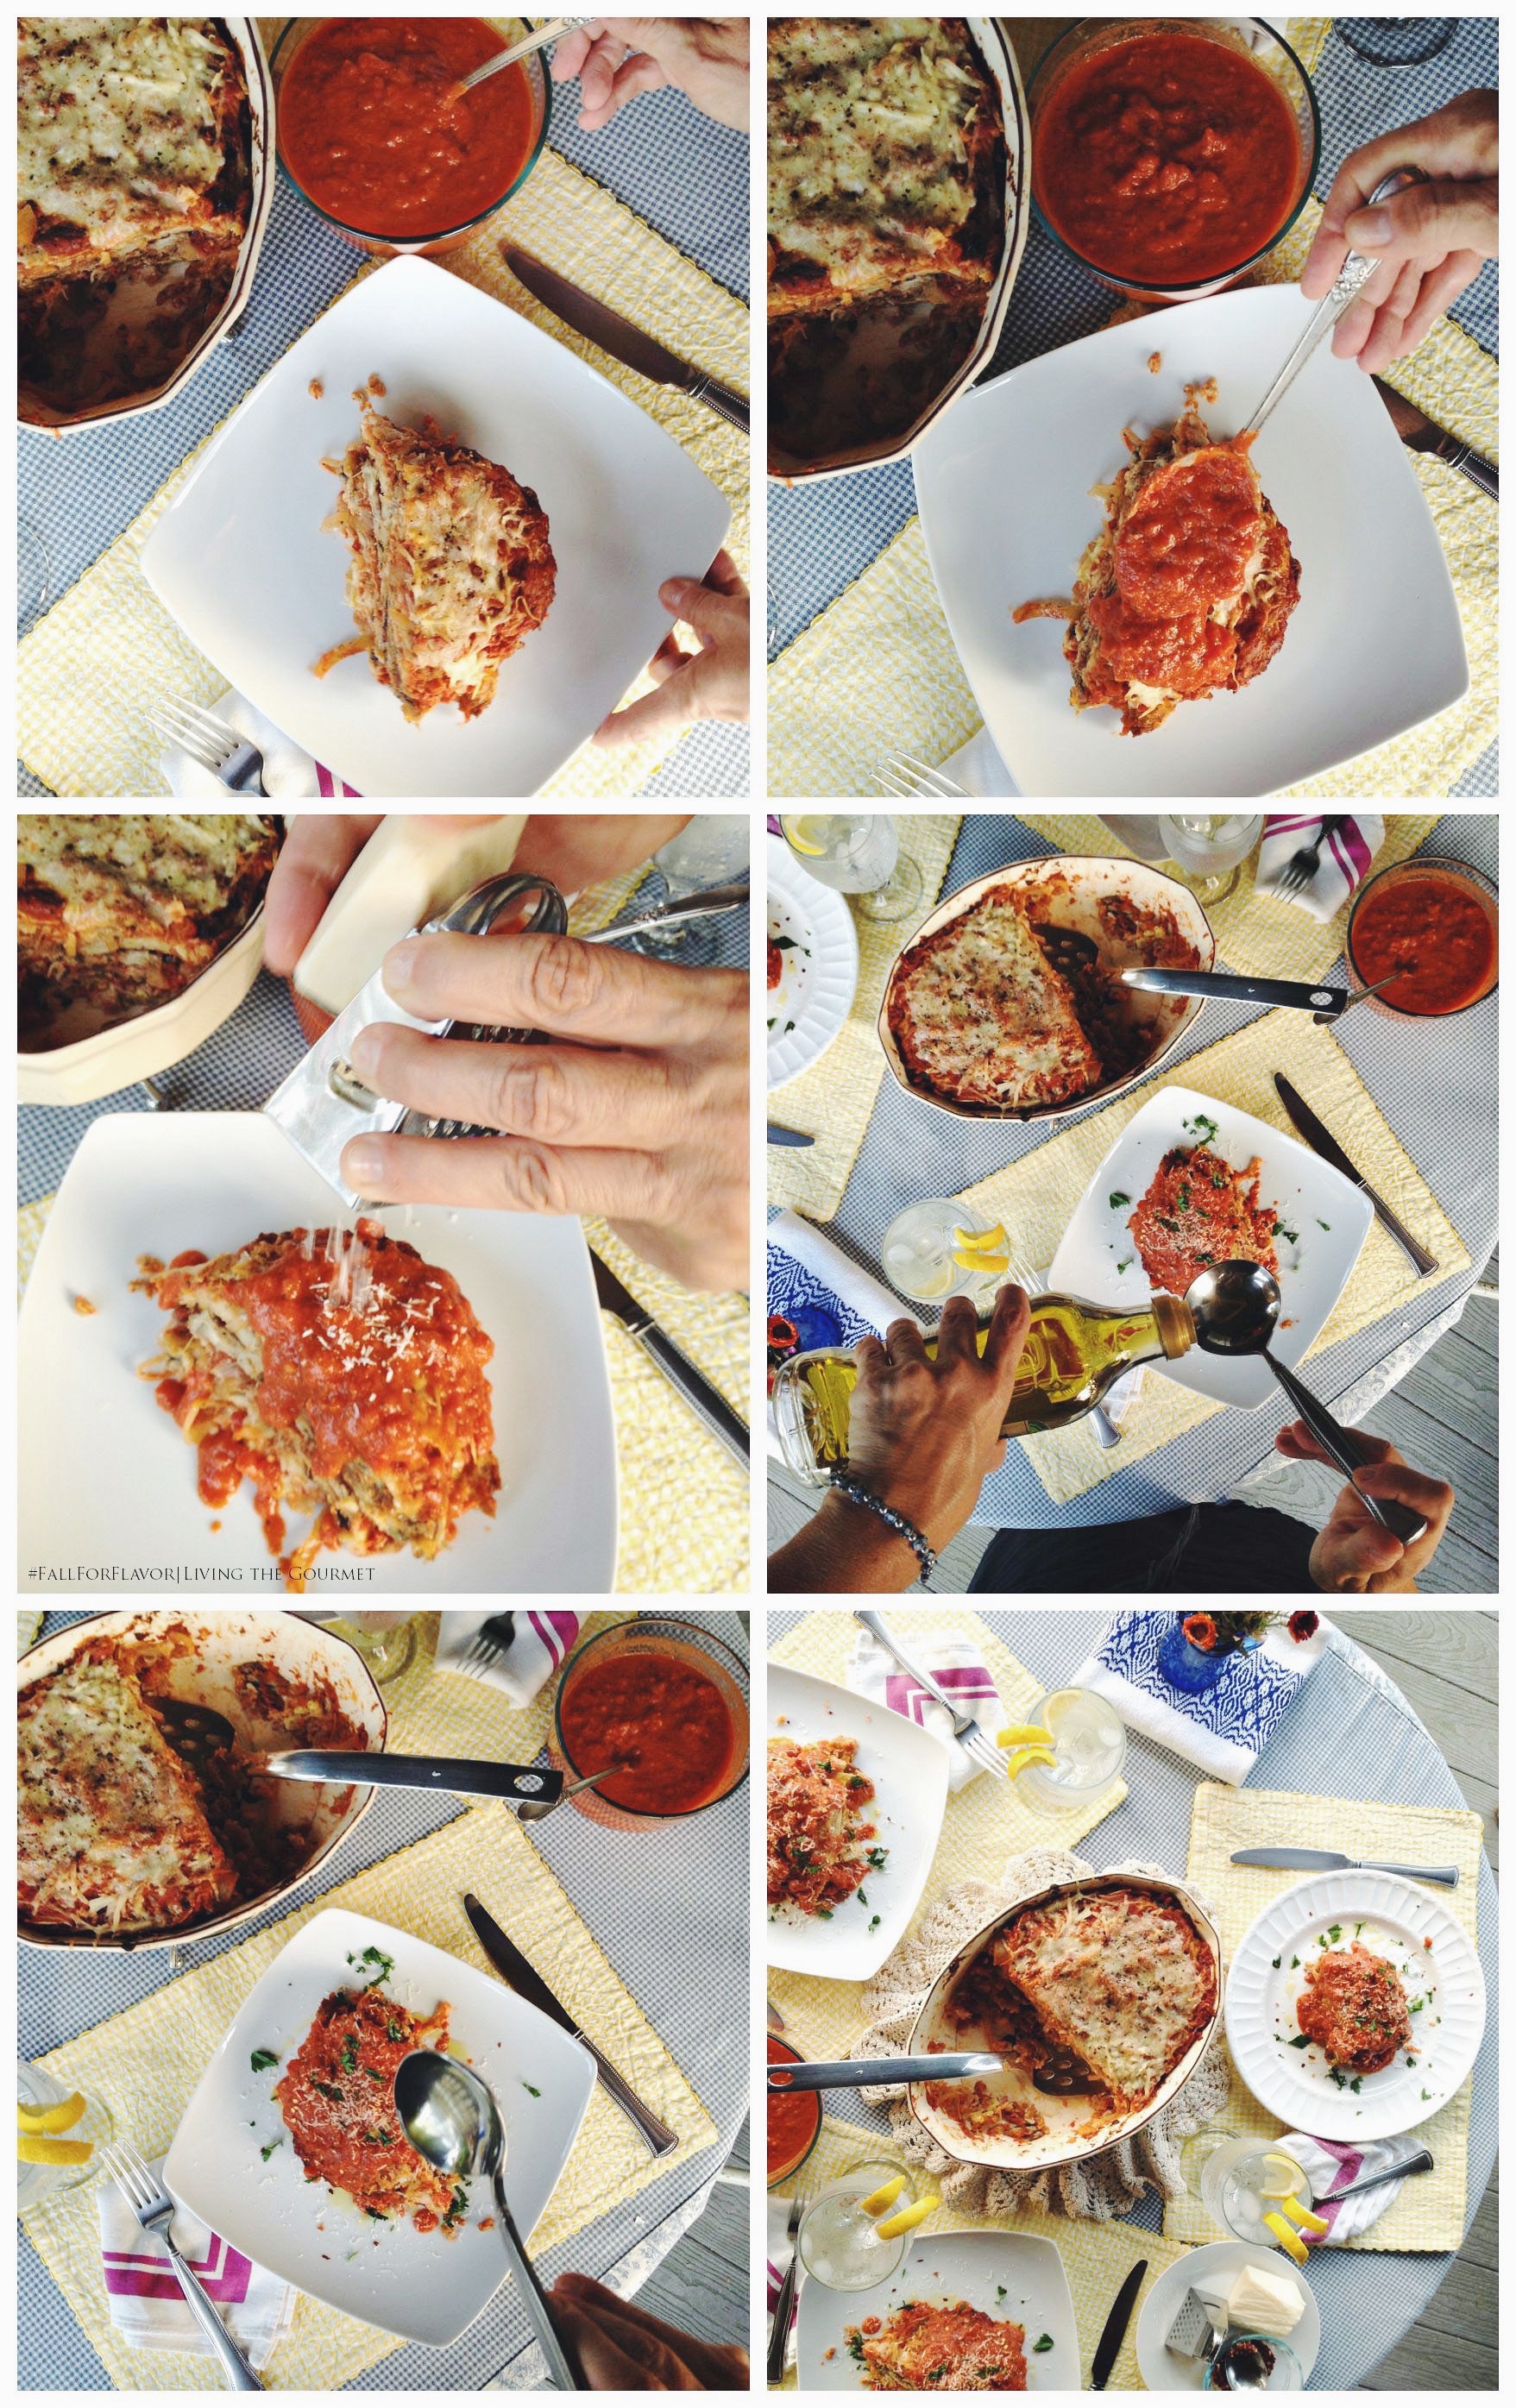 Living the Gourmet: Eggplant and Zucchini Parmesan PLUS $50 VISA Giveaway | #FallForFlavor #Ad